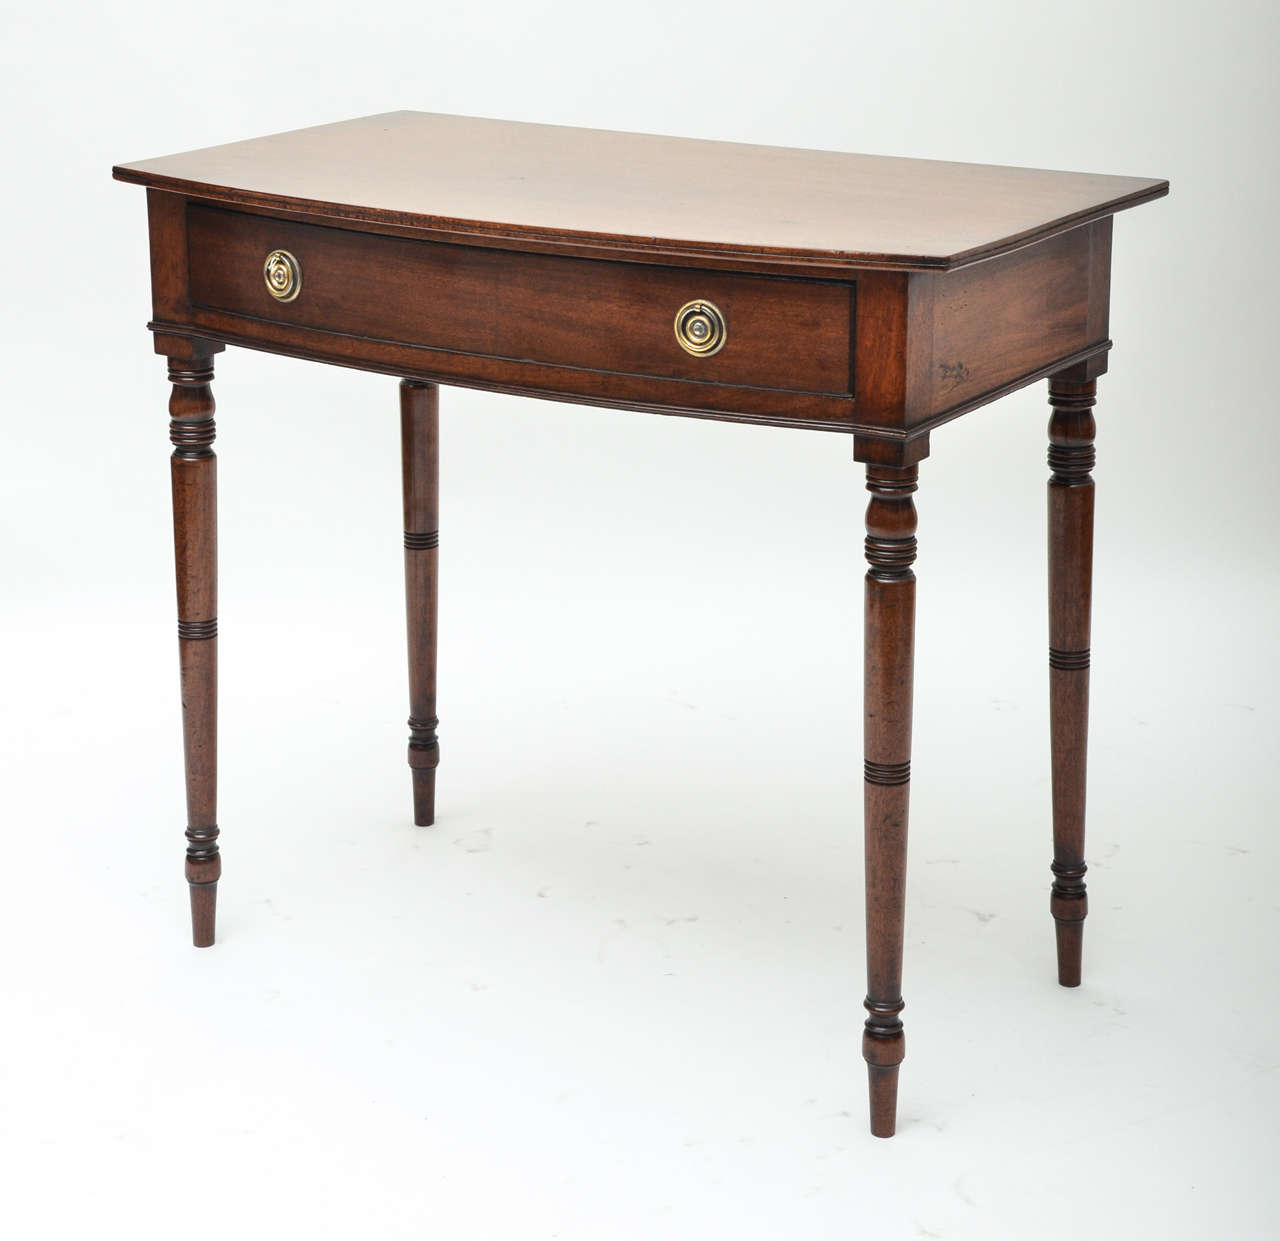 An early 19th century English Regency mahogany bow front side table with one drawer, turned legs and brass ring pulls.